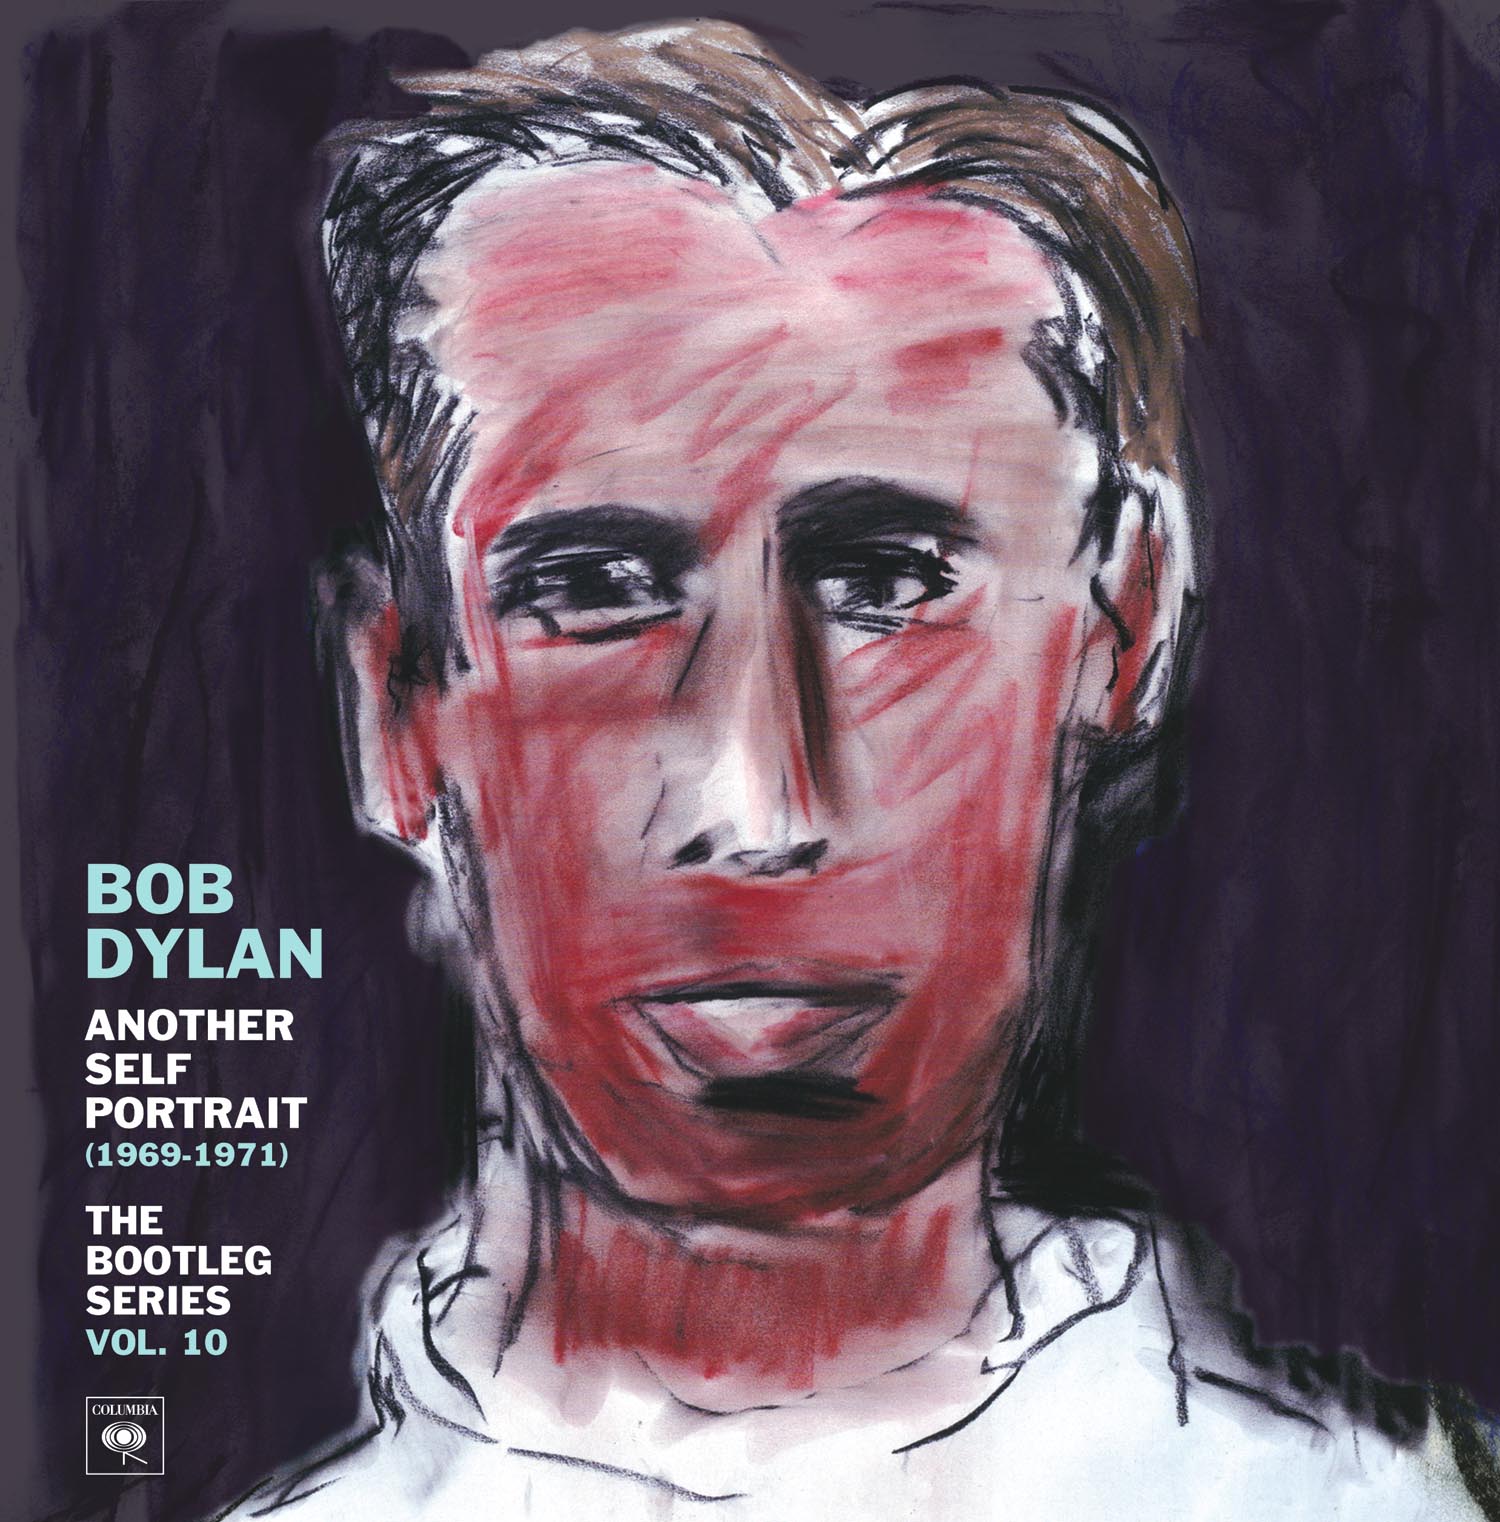 News Added Jul 16, 2013 Bob Dylan will release 'Another Self Portrait' in August as part of his ongoing Bootleg Series. The set features unheard material from 'Self Portrait' along with cuts from 'Nashville Skyline' and 'New Morning.' Submitted By rajab